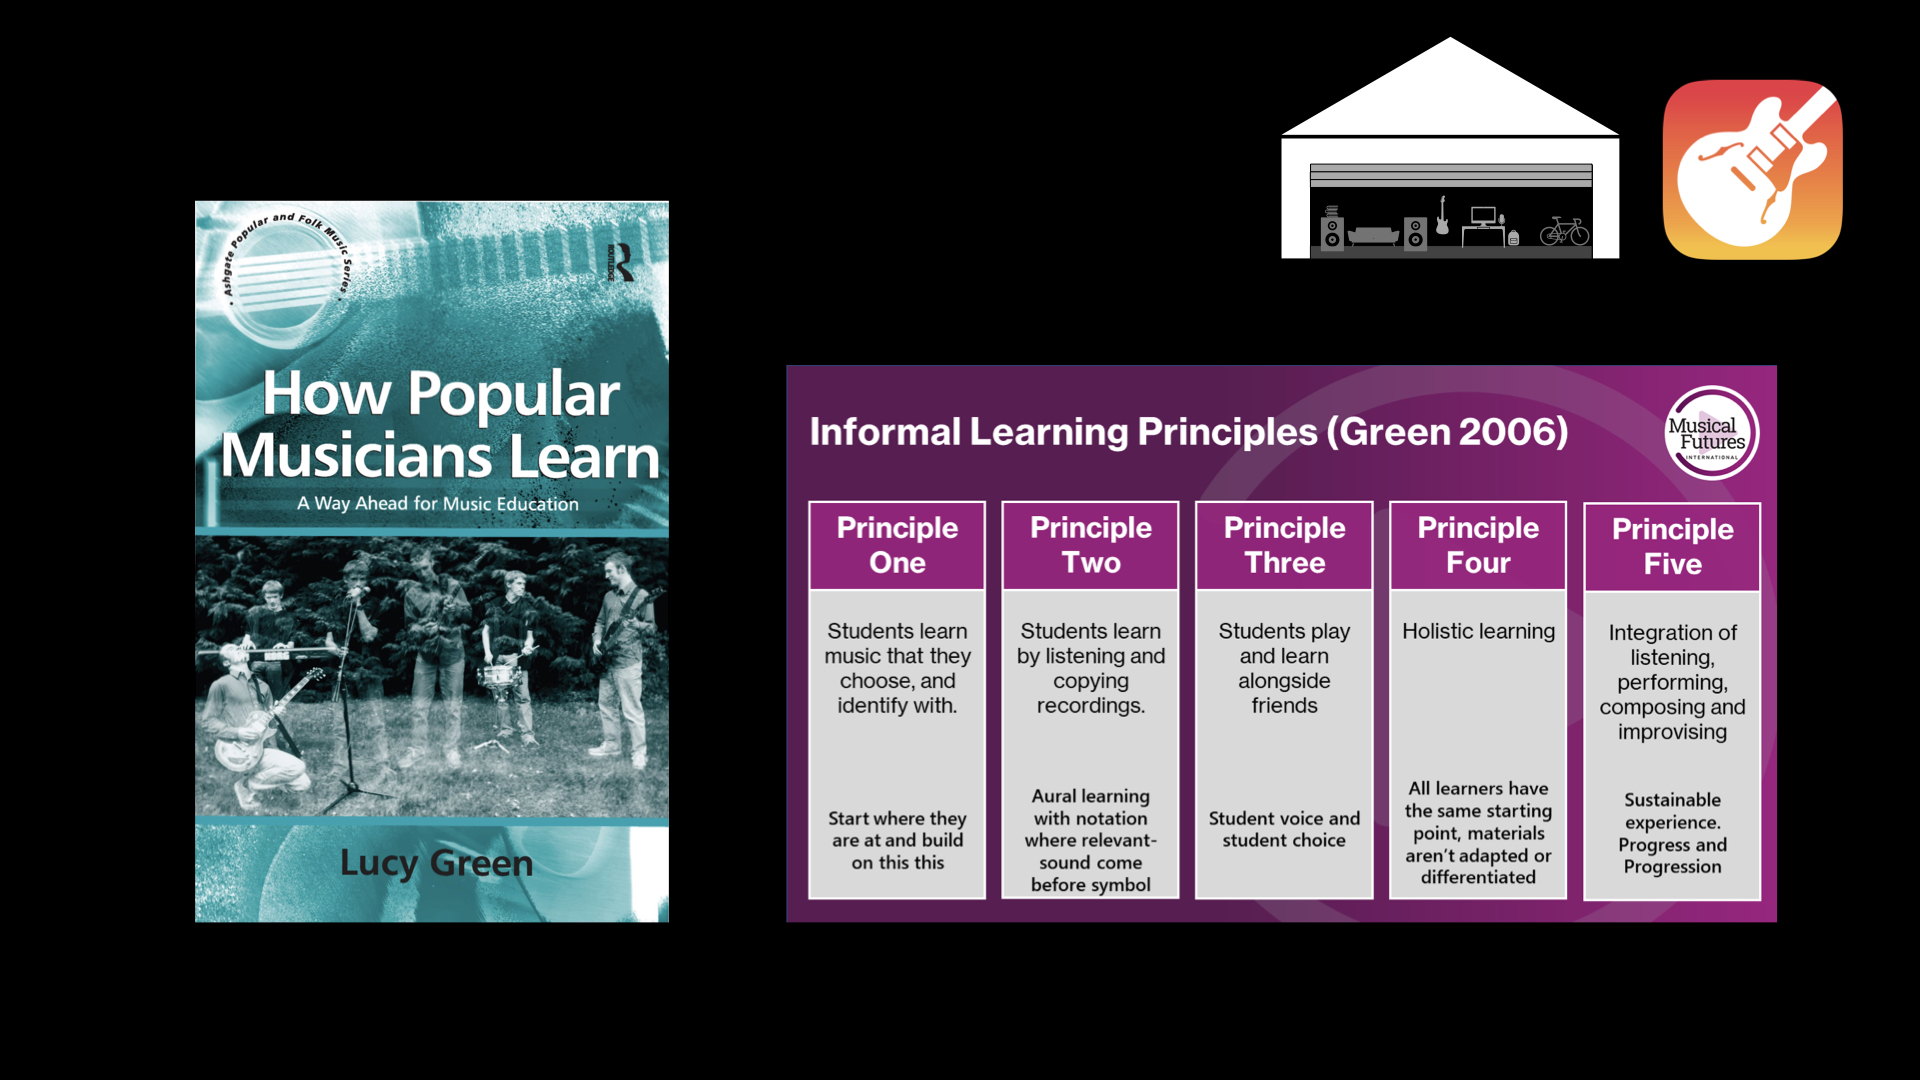 Lucy green’s book how musicians learn and the 5 key informal learning principles